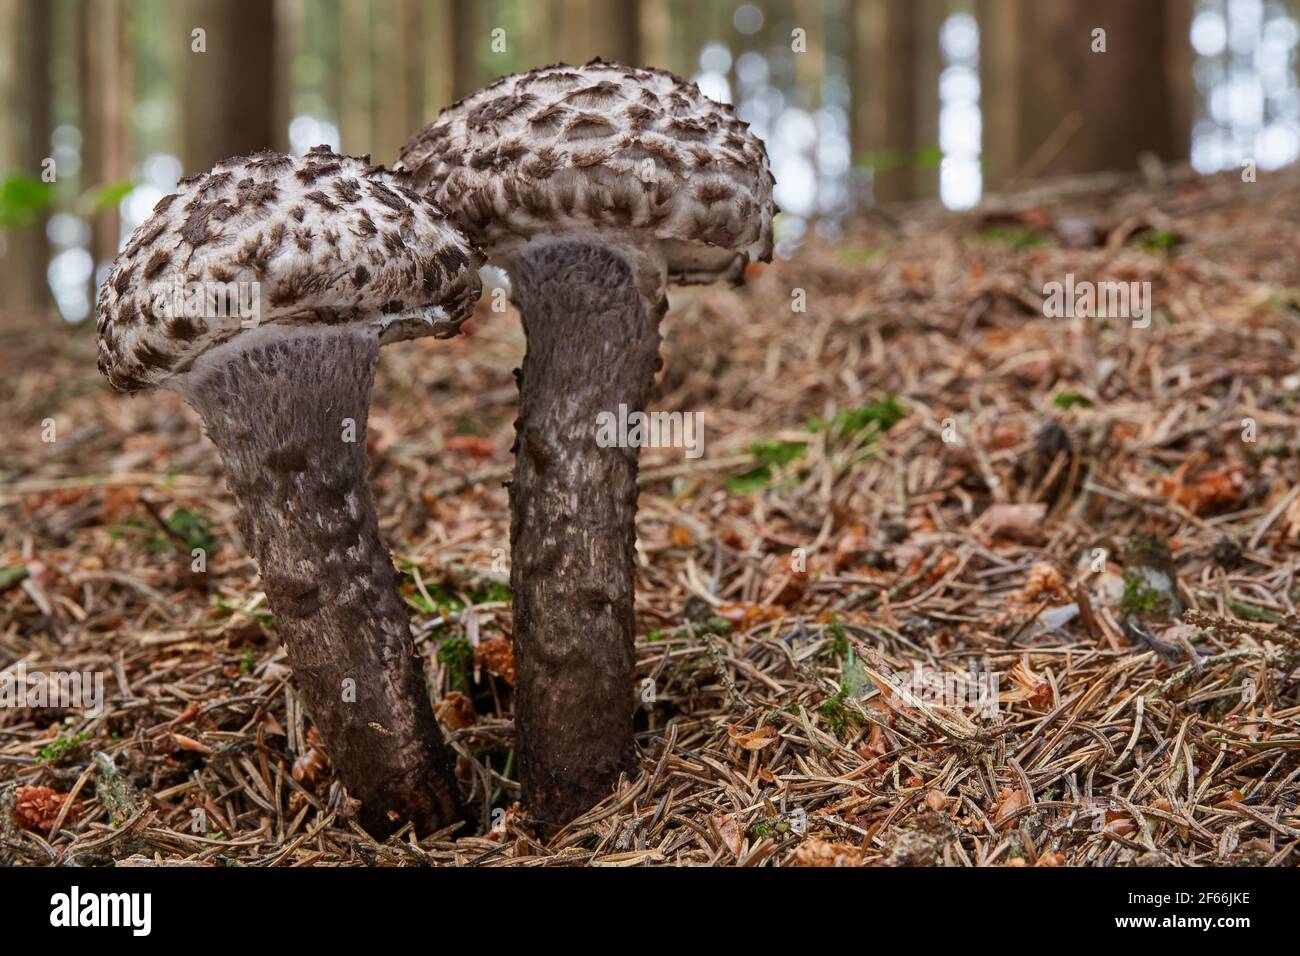 Strobilomyces floccopus - edible mushroom. Fungus in the natural environment. English: old man of the woods. Czech: Siskovec cerny Stock Photo